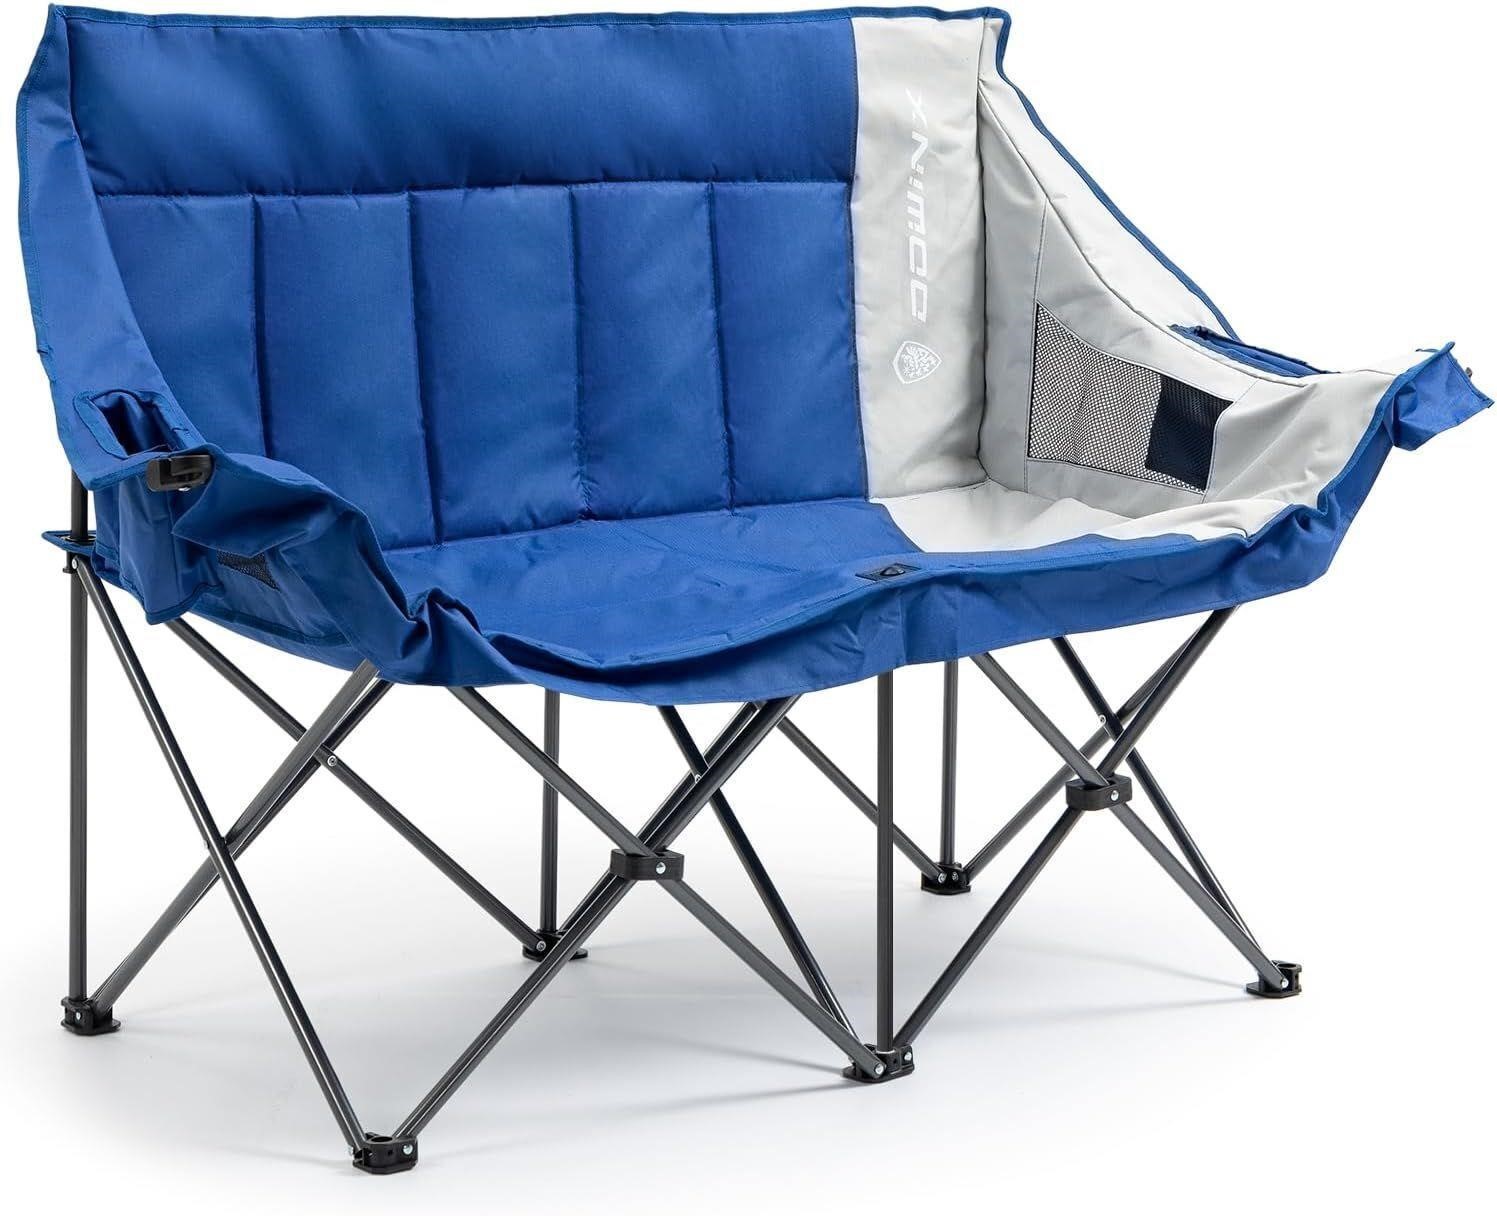 Dowinx Double Camping Chair